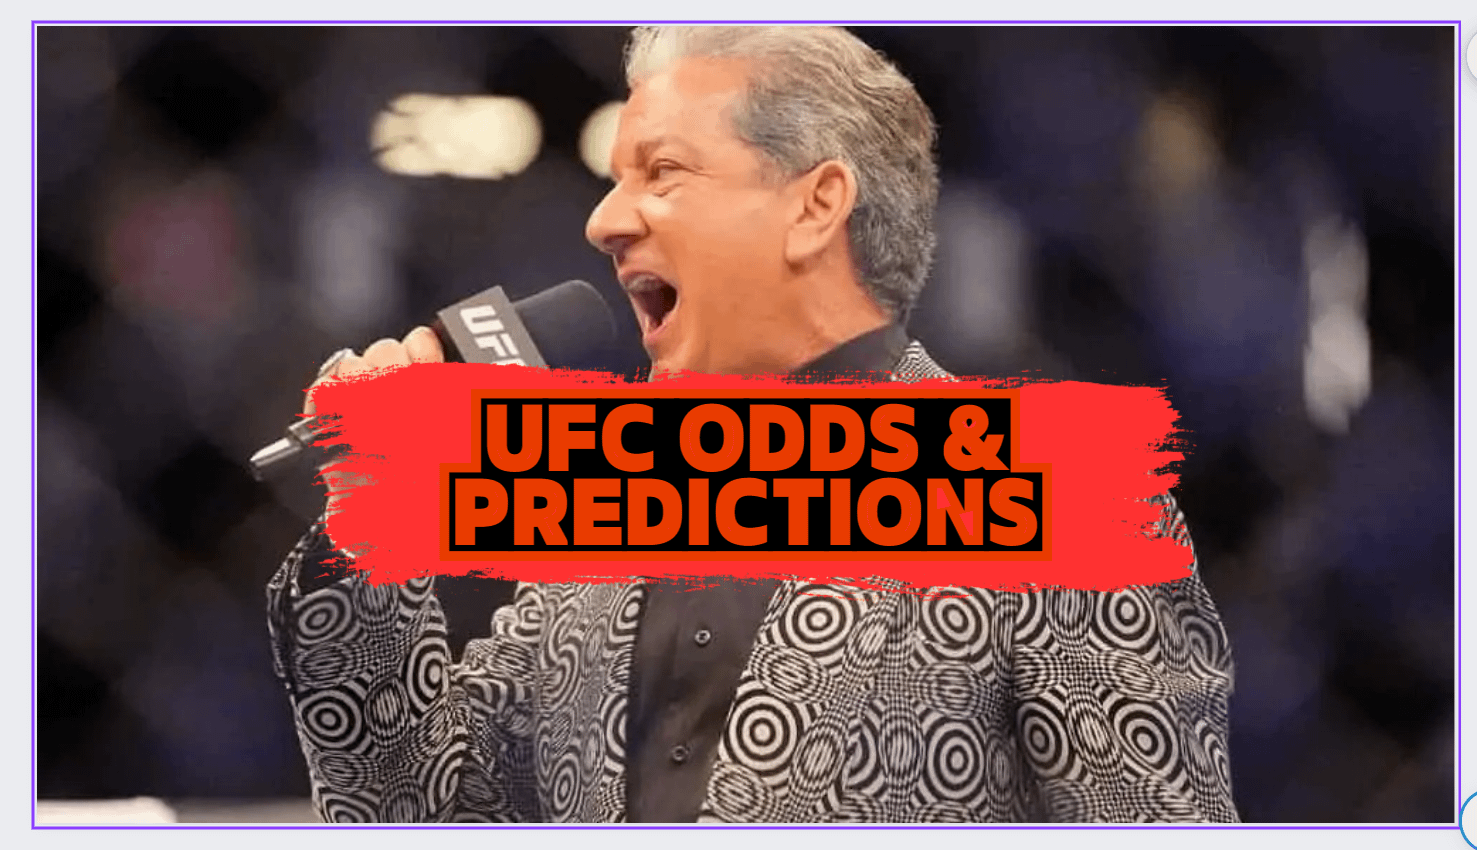 With UFC Fight Night approaching, it's time to release our Drew Dober-Ricky Glenn pick, prediction, and odds...